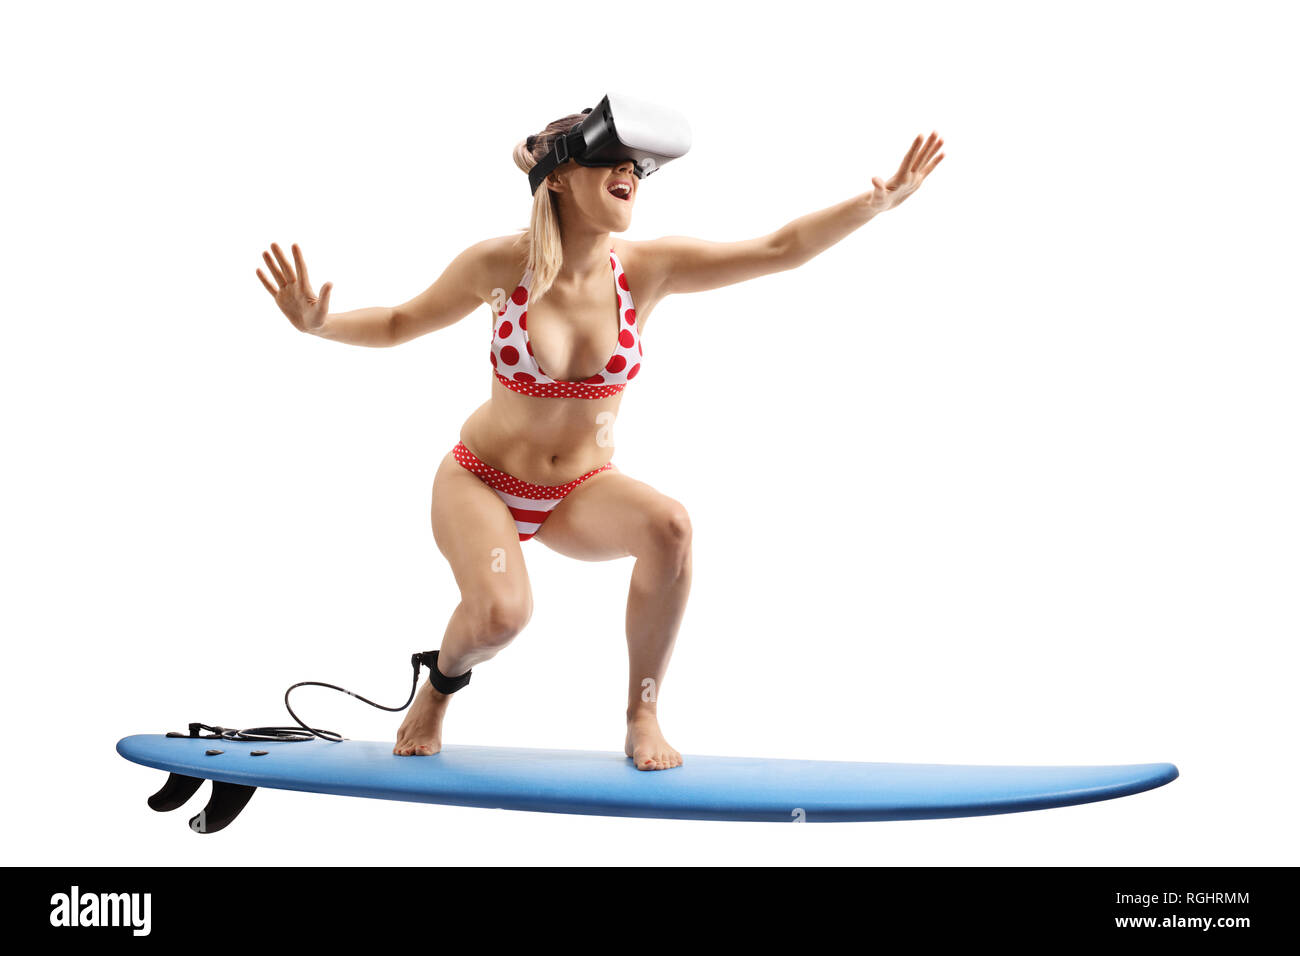 Full length shot of a young woman in bikini surfing with a VR set isolated on white background Stock Photo